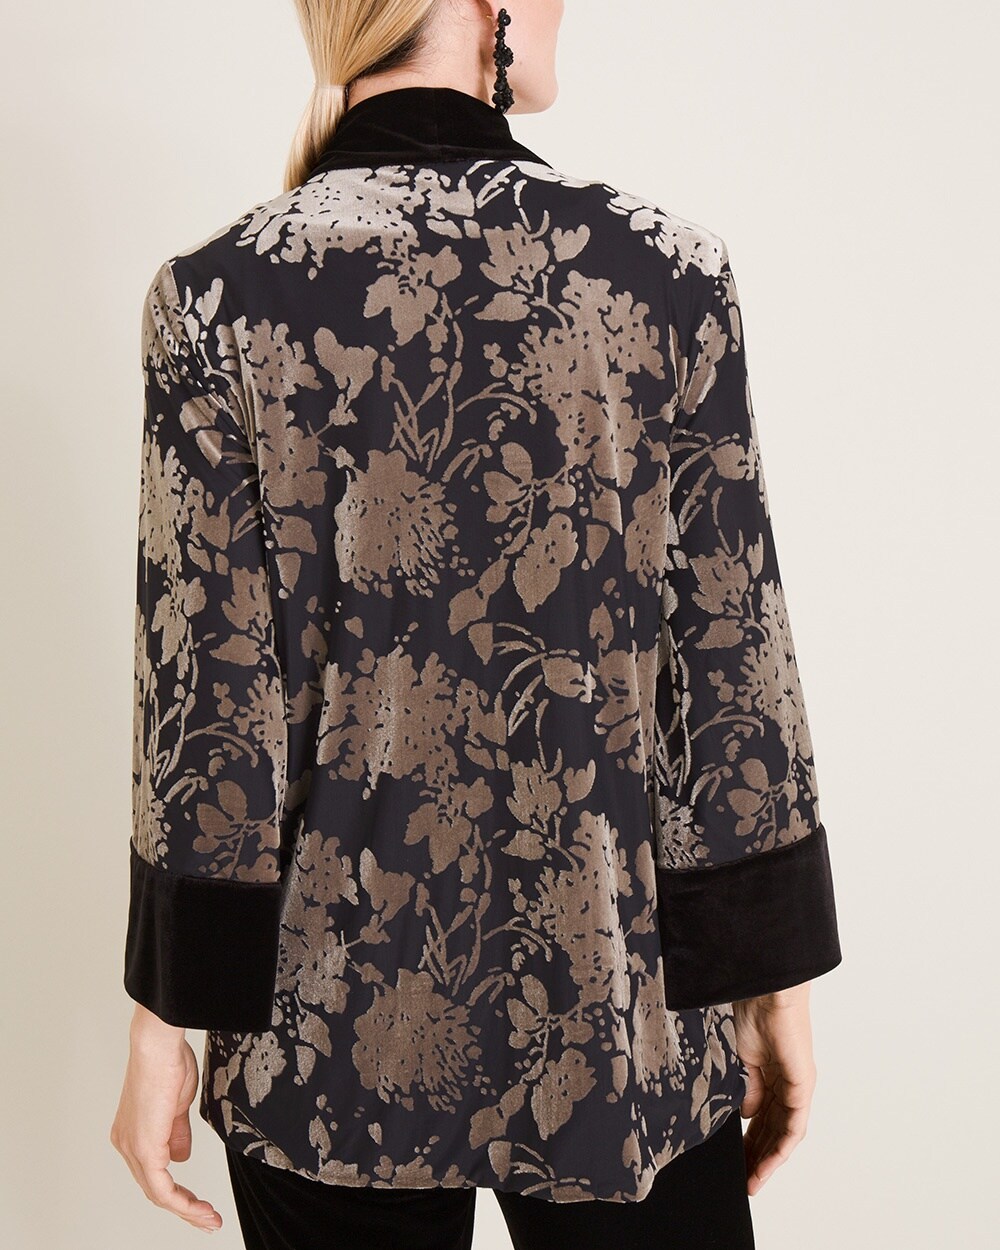 Travelers Collection Reversible Floral Velvet Jacket - Chico's